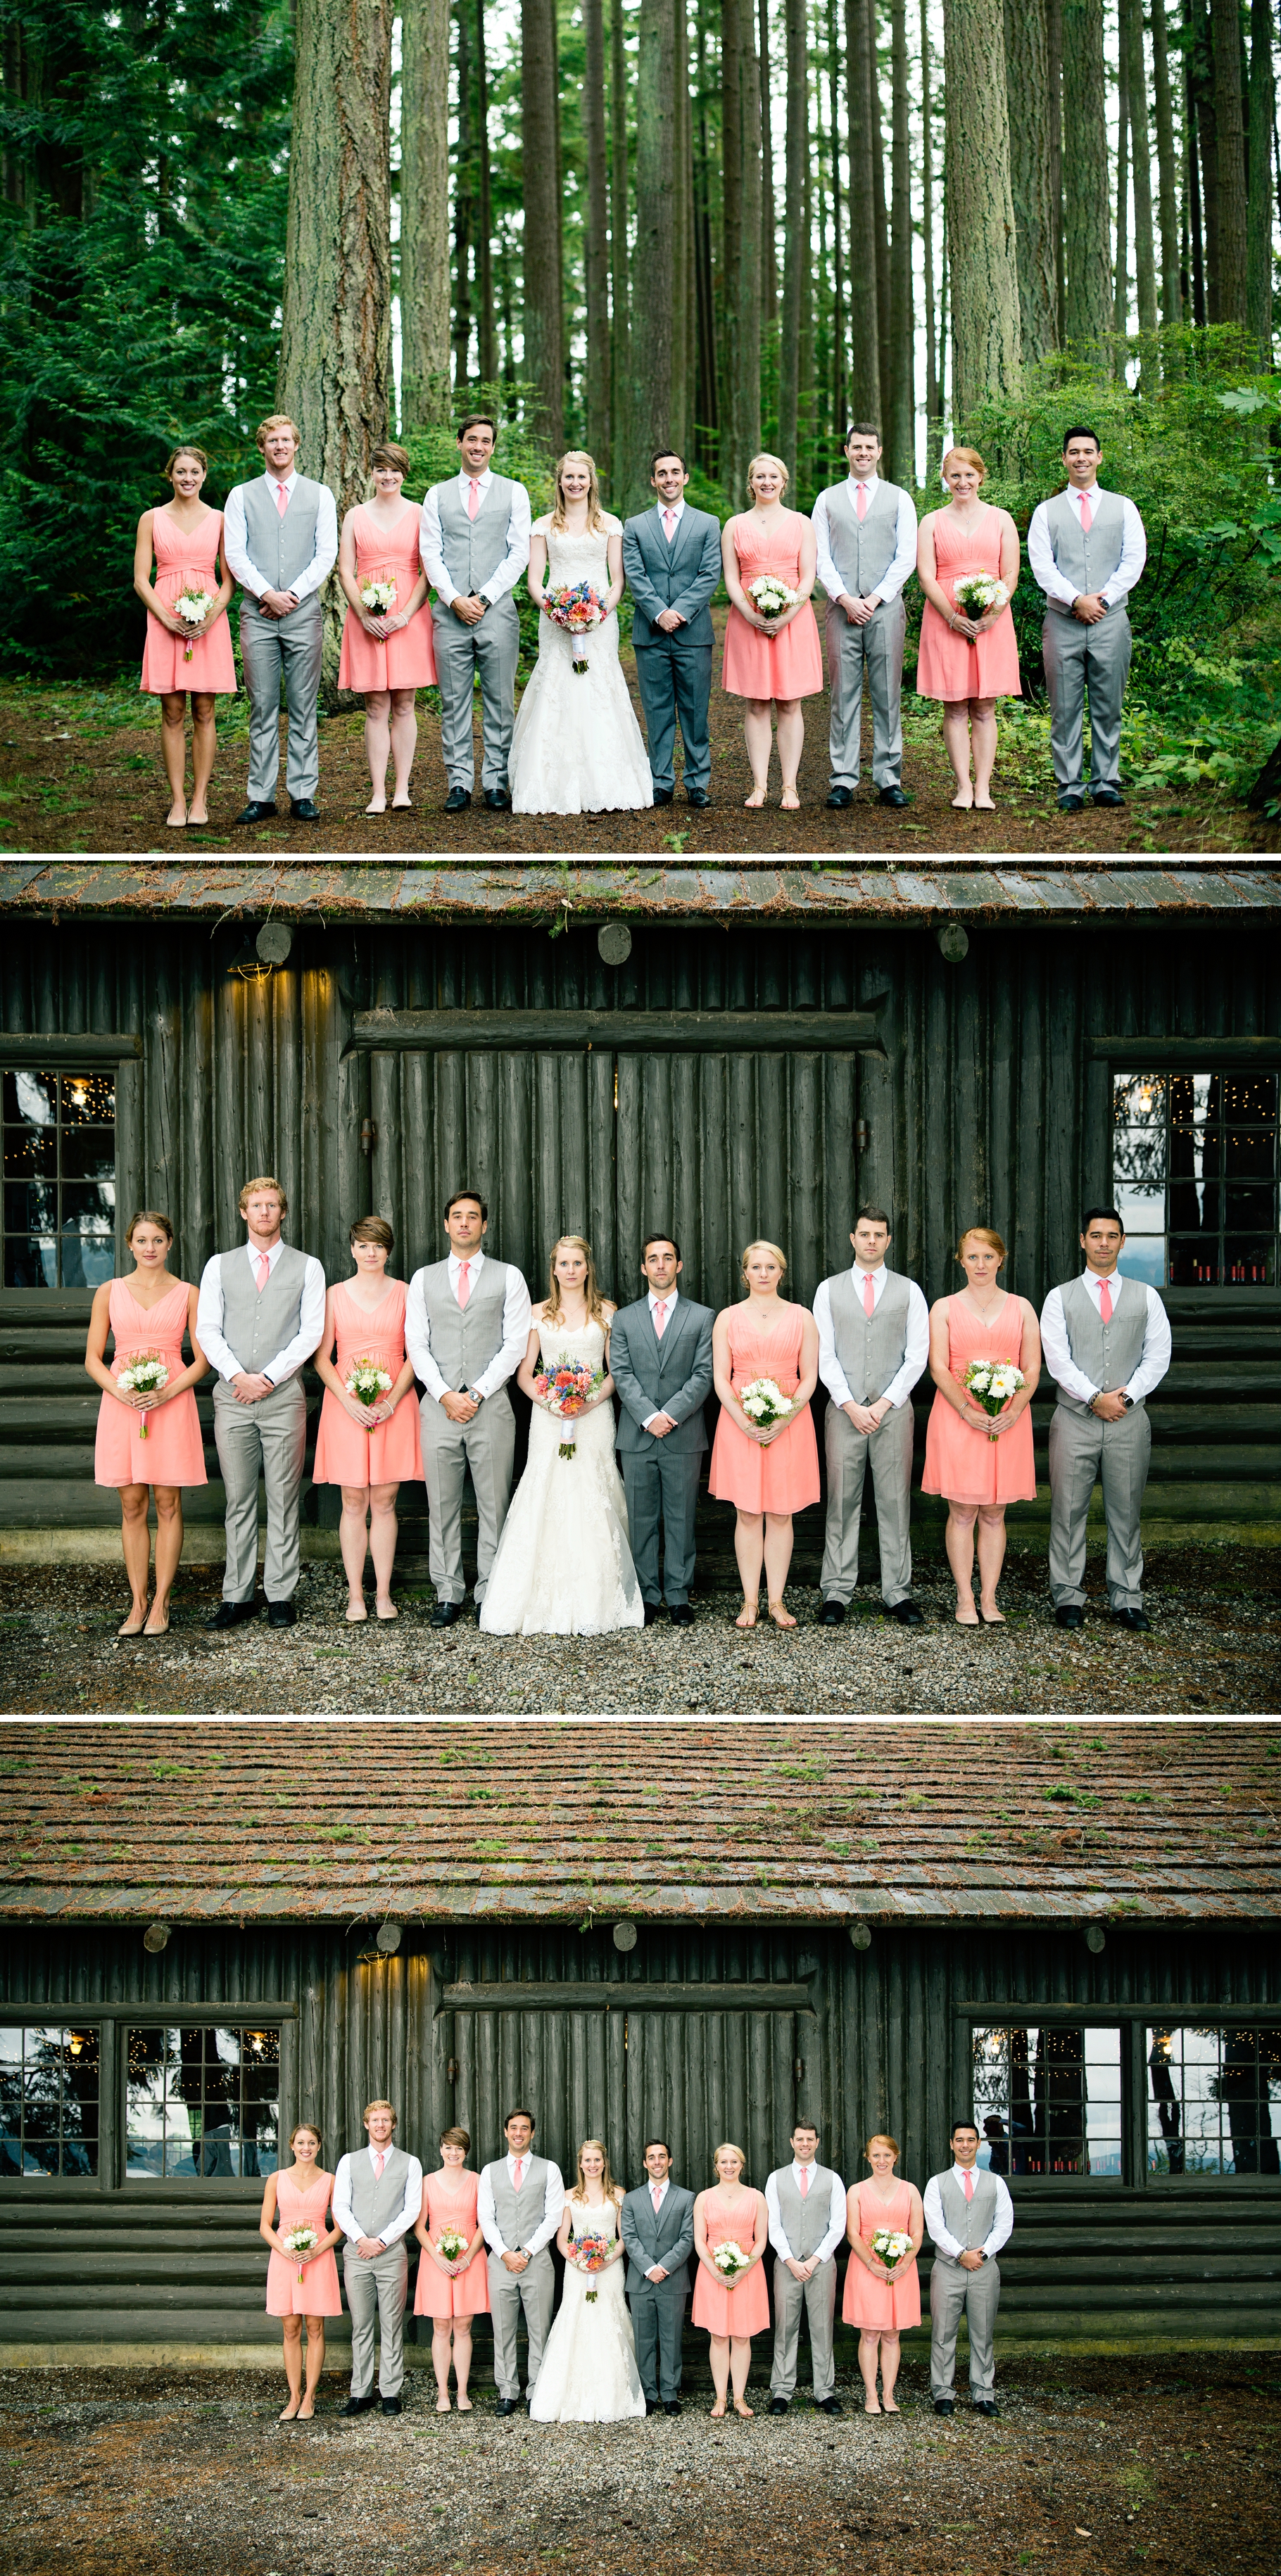 43-Wedding-Party-Portraits-Bridesmaids-Groomsmen-Bride-Groom-wooded-bluff-olympic-mountains-log-cabin-Kitsap-Memorial-State-Park-Forest-Northwest-Photographer-Seattle-Wedding-Photography-by-Betty-Elaine